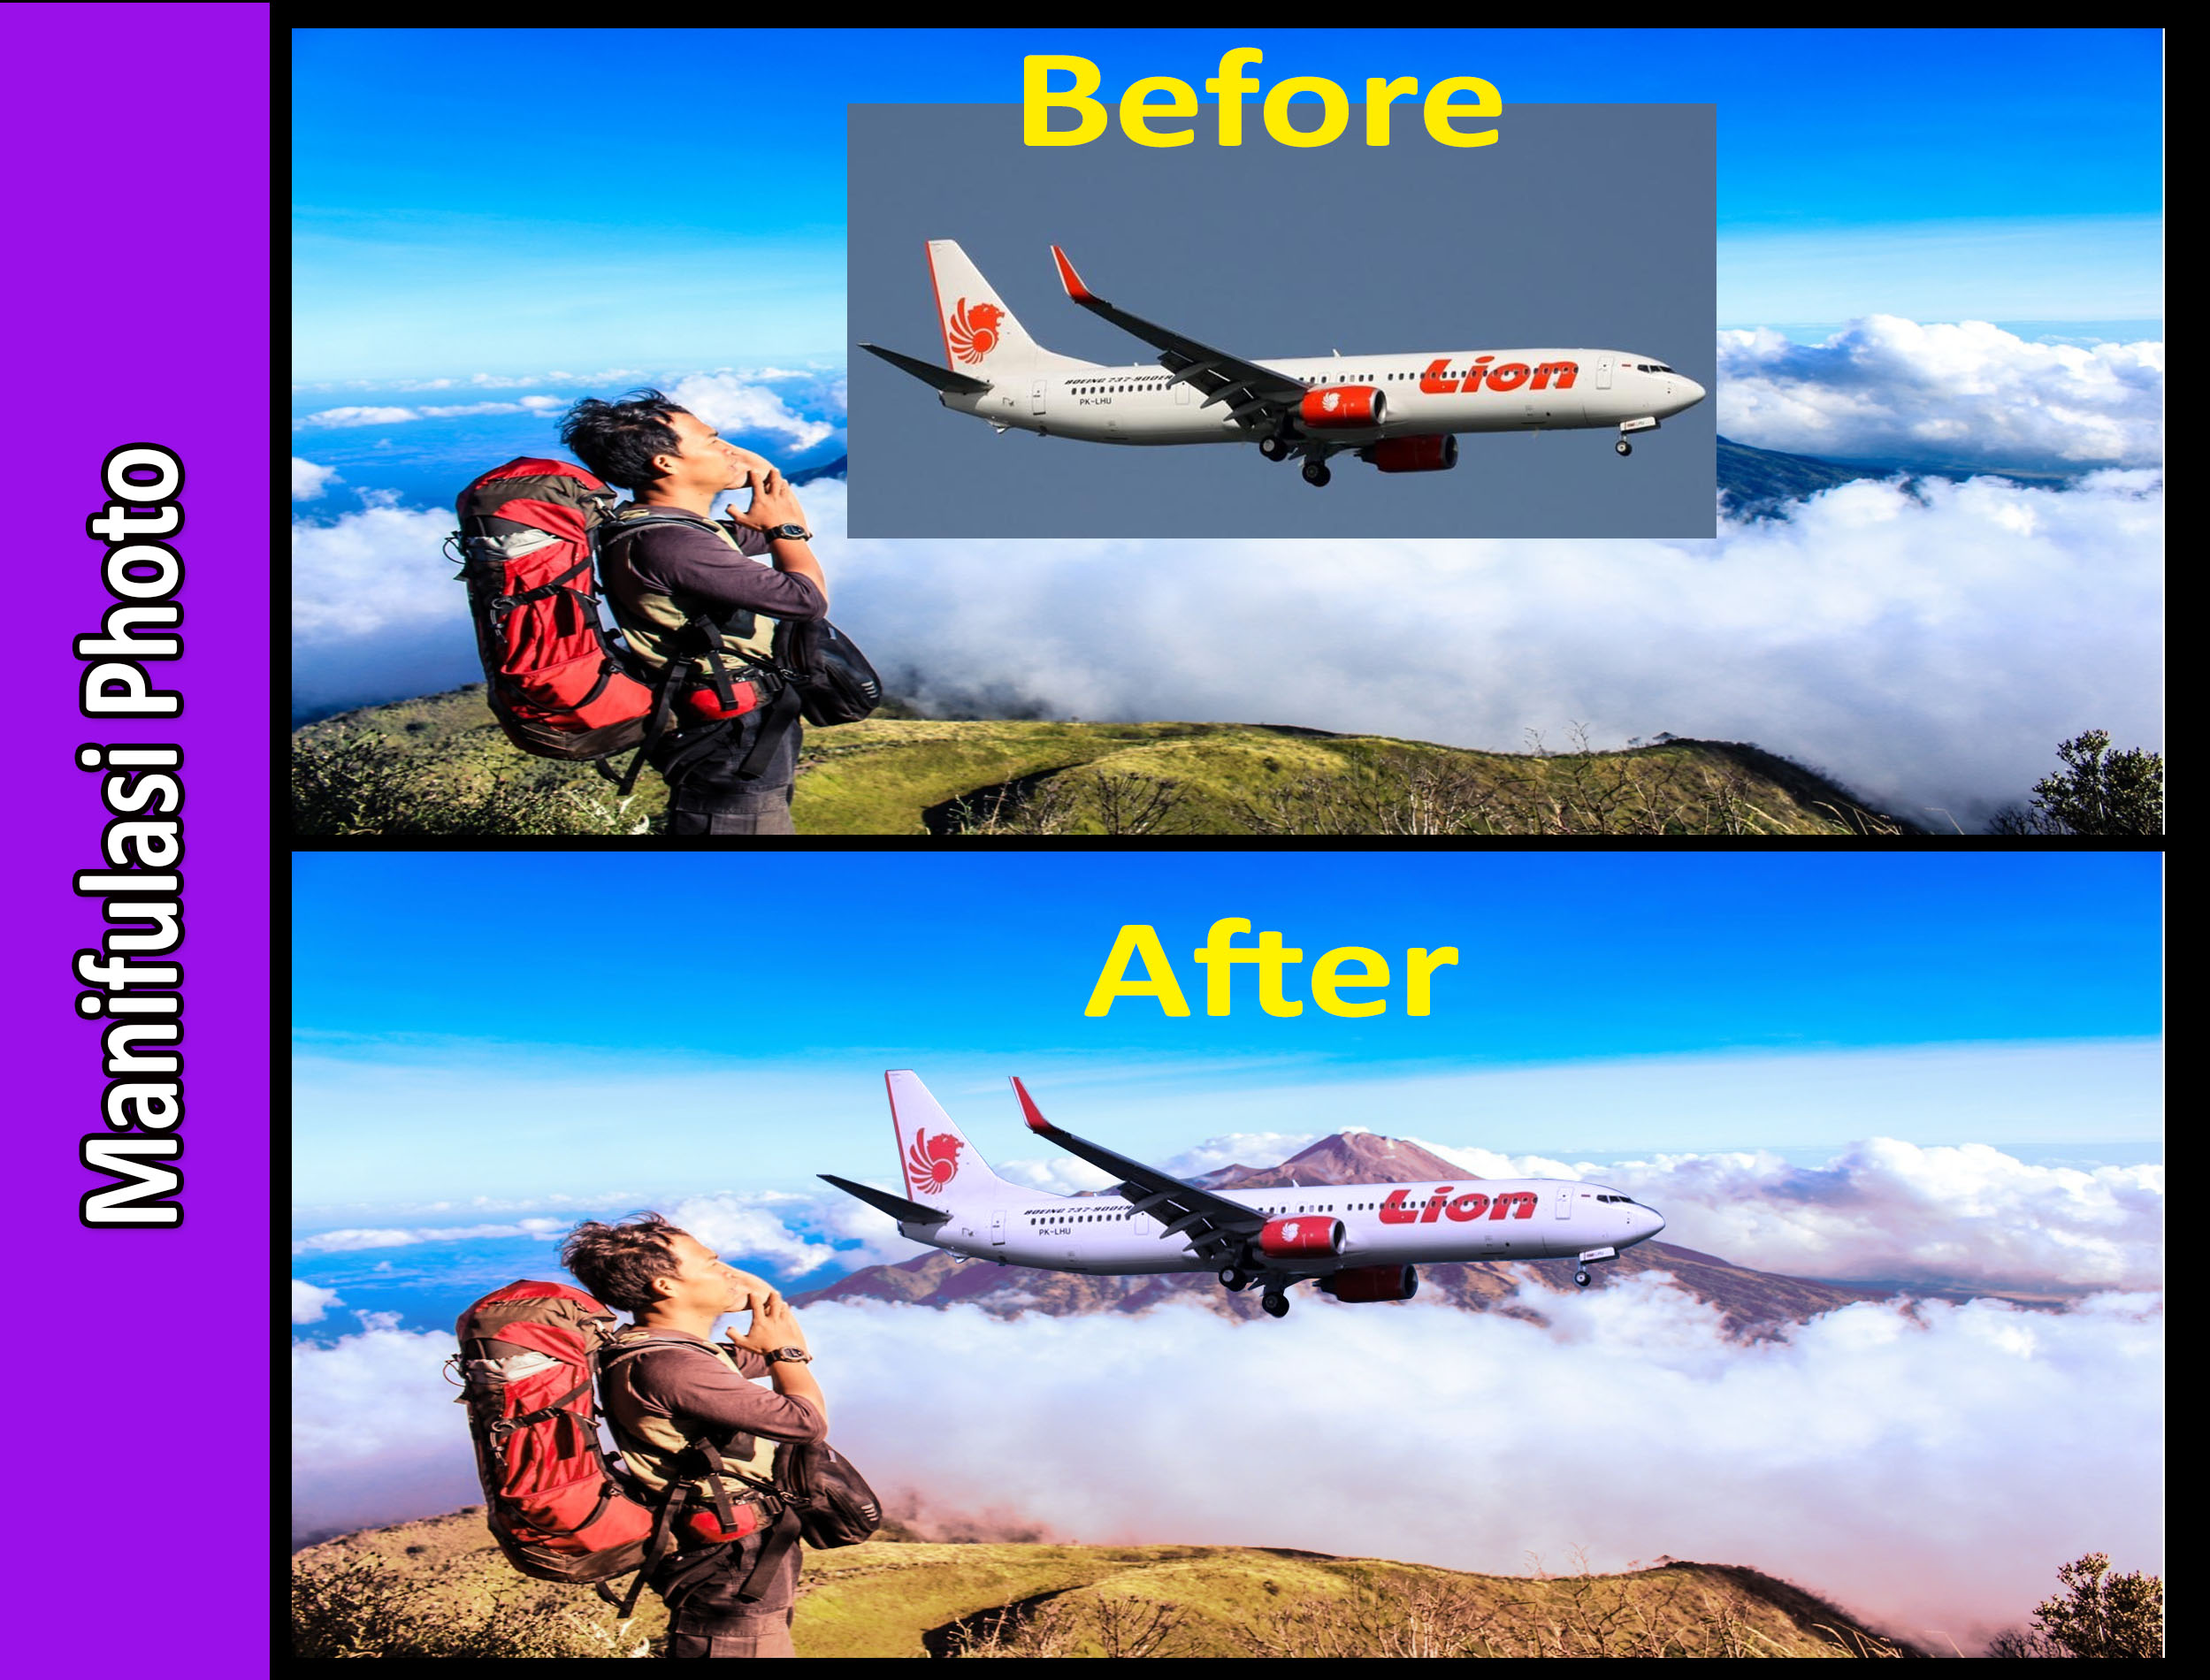 Image Editing & Photoshop from din1723